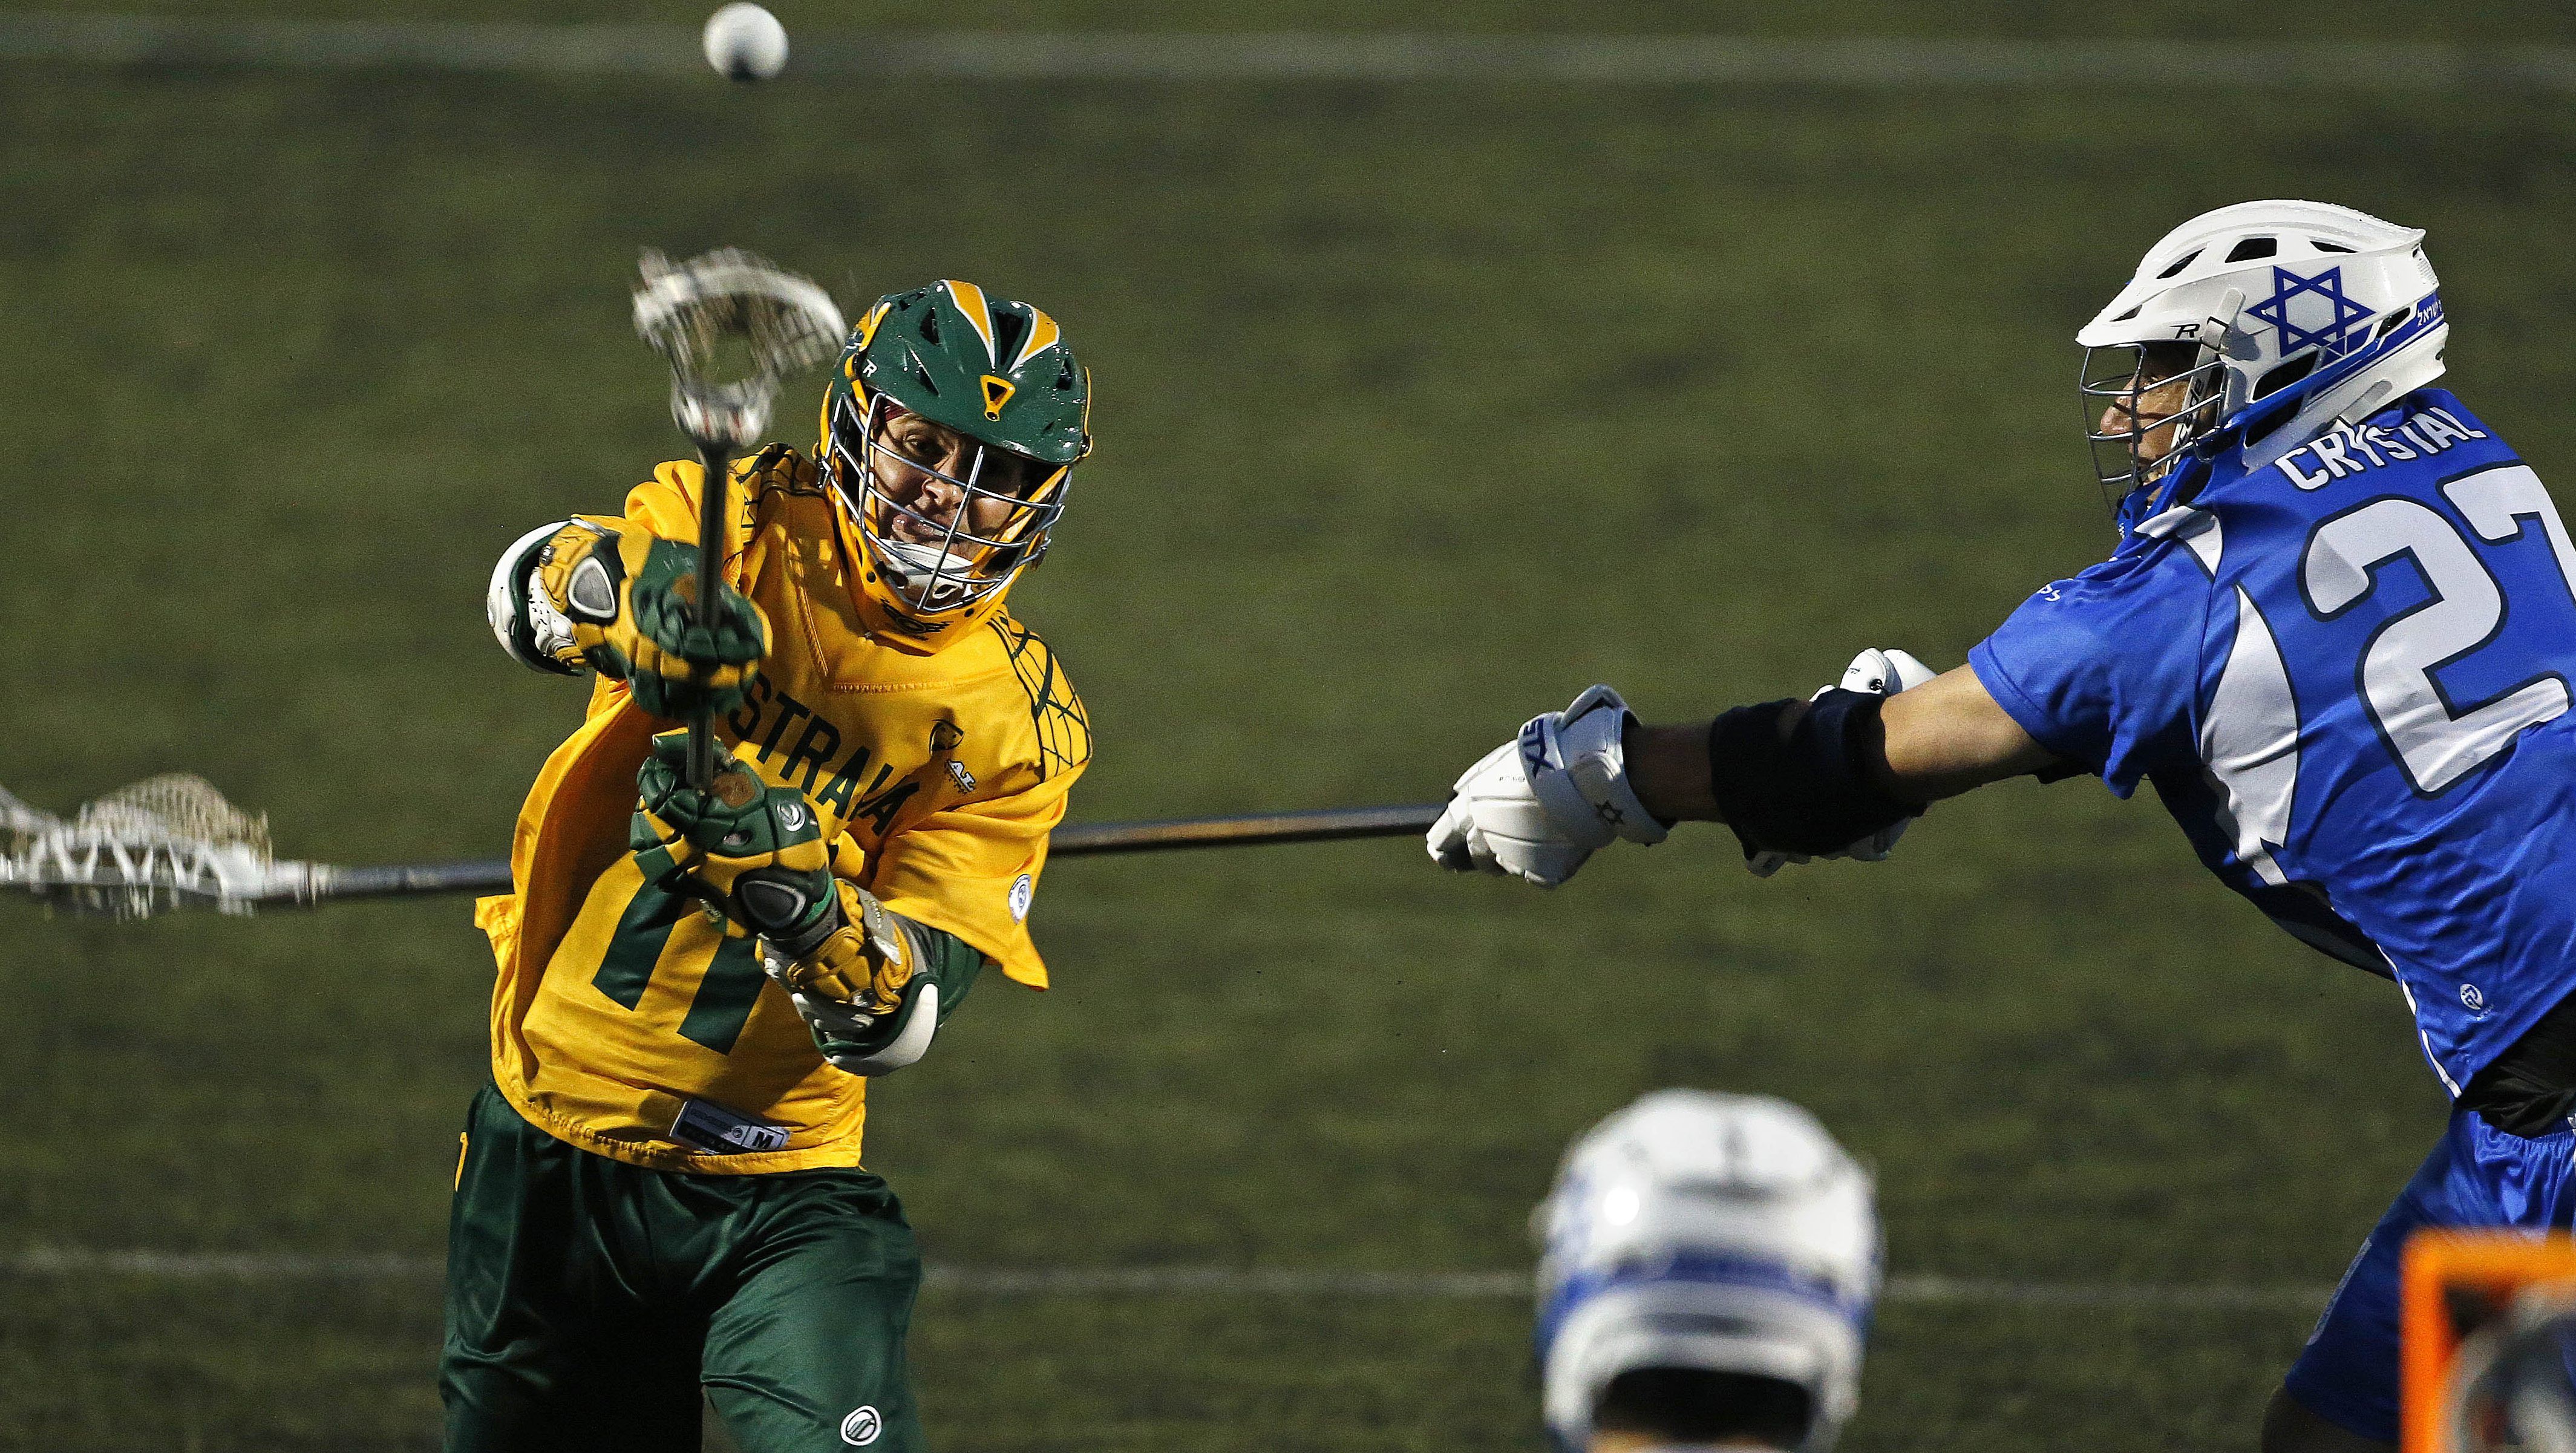 Forget the World Cup. Lacrosse is the international sport to watch ...